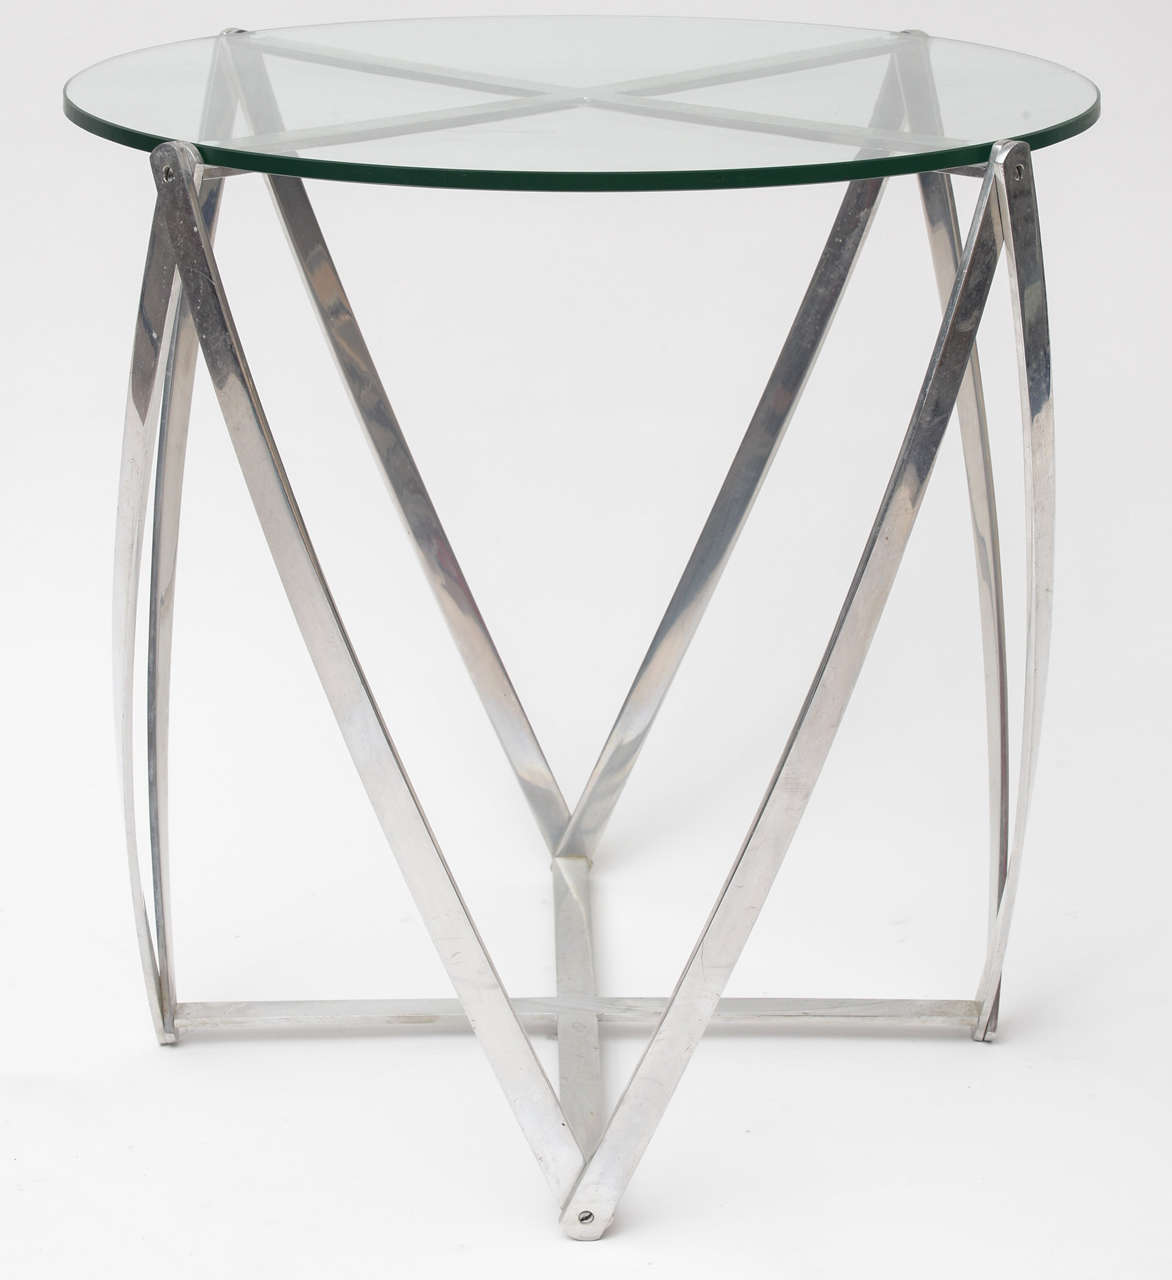 Based on a 19th century wool winder, used in the production of yarn, this table.
Translated into polished aluminium is a modern classic.